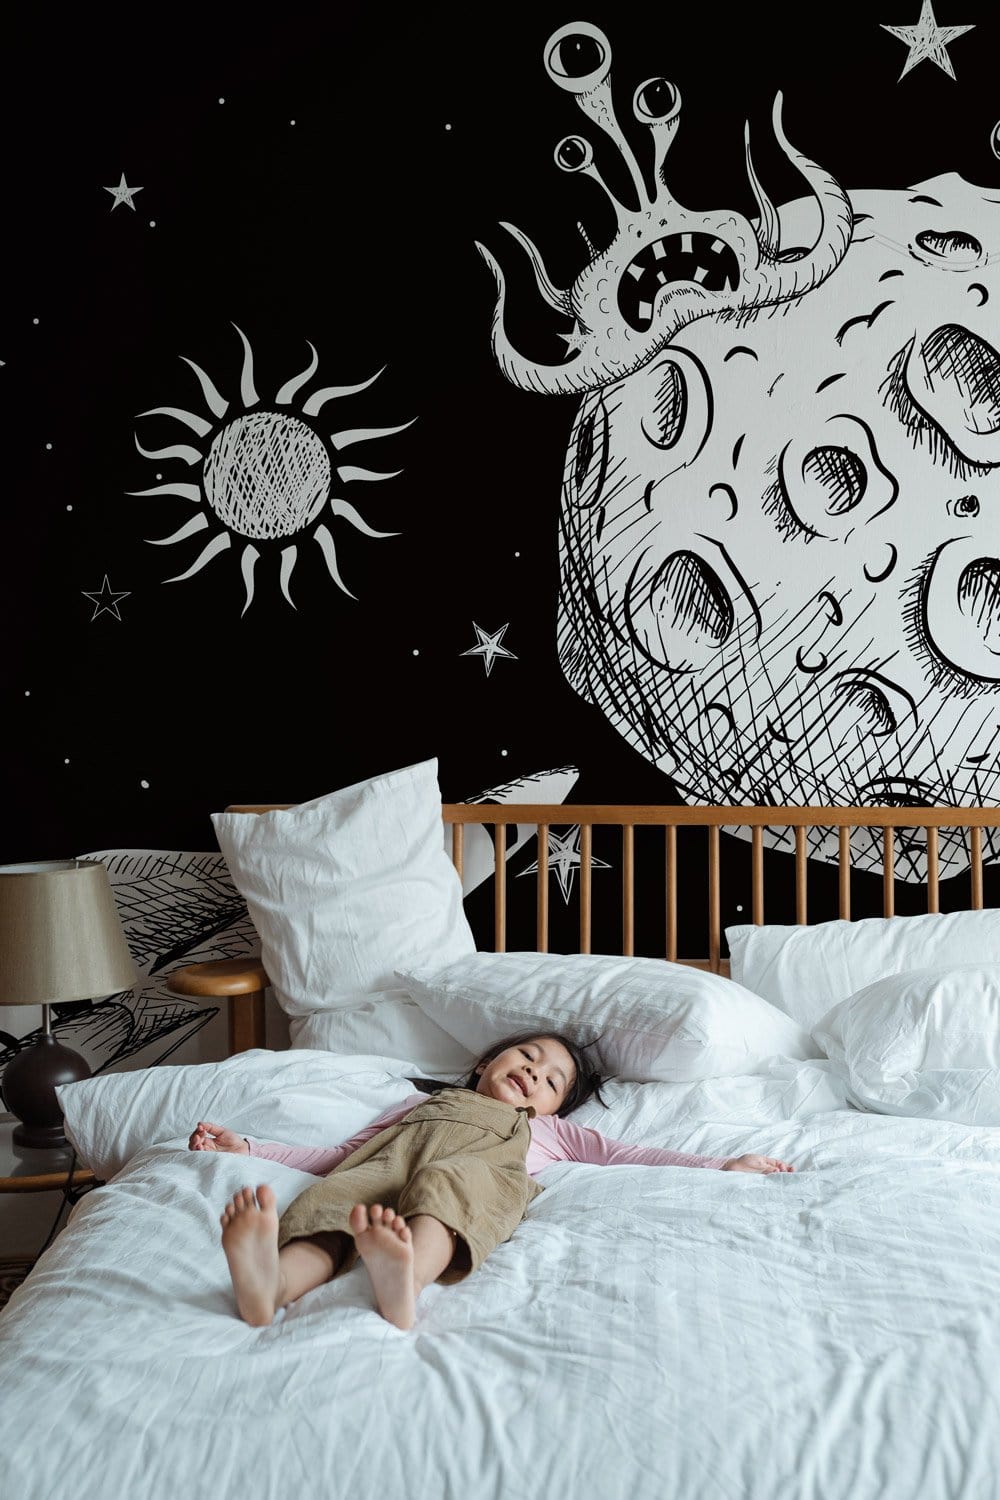 Wallpaper mural depicting outer space for the bedroom